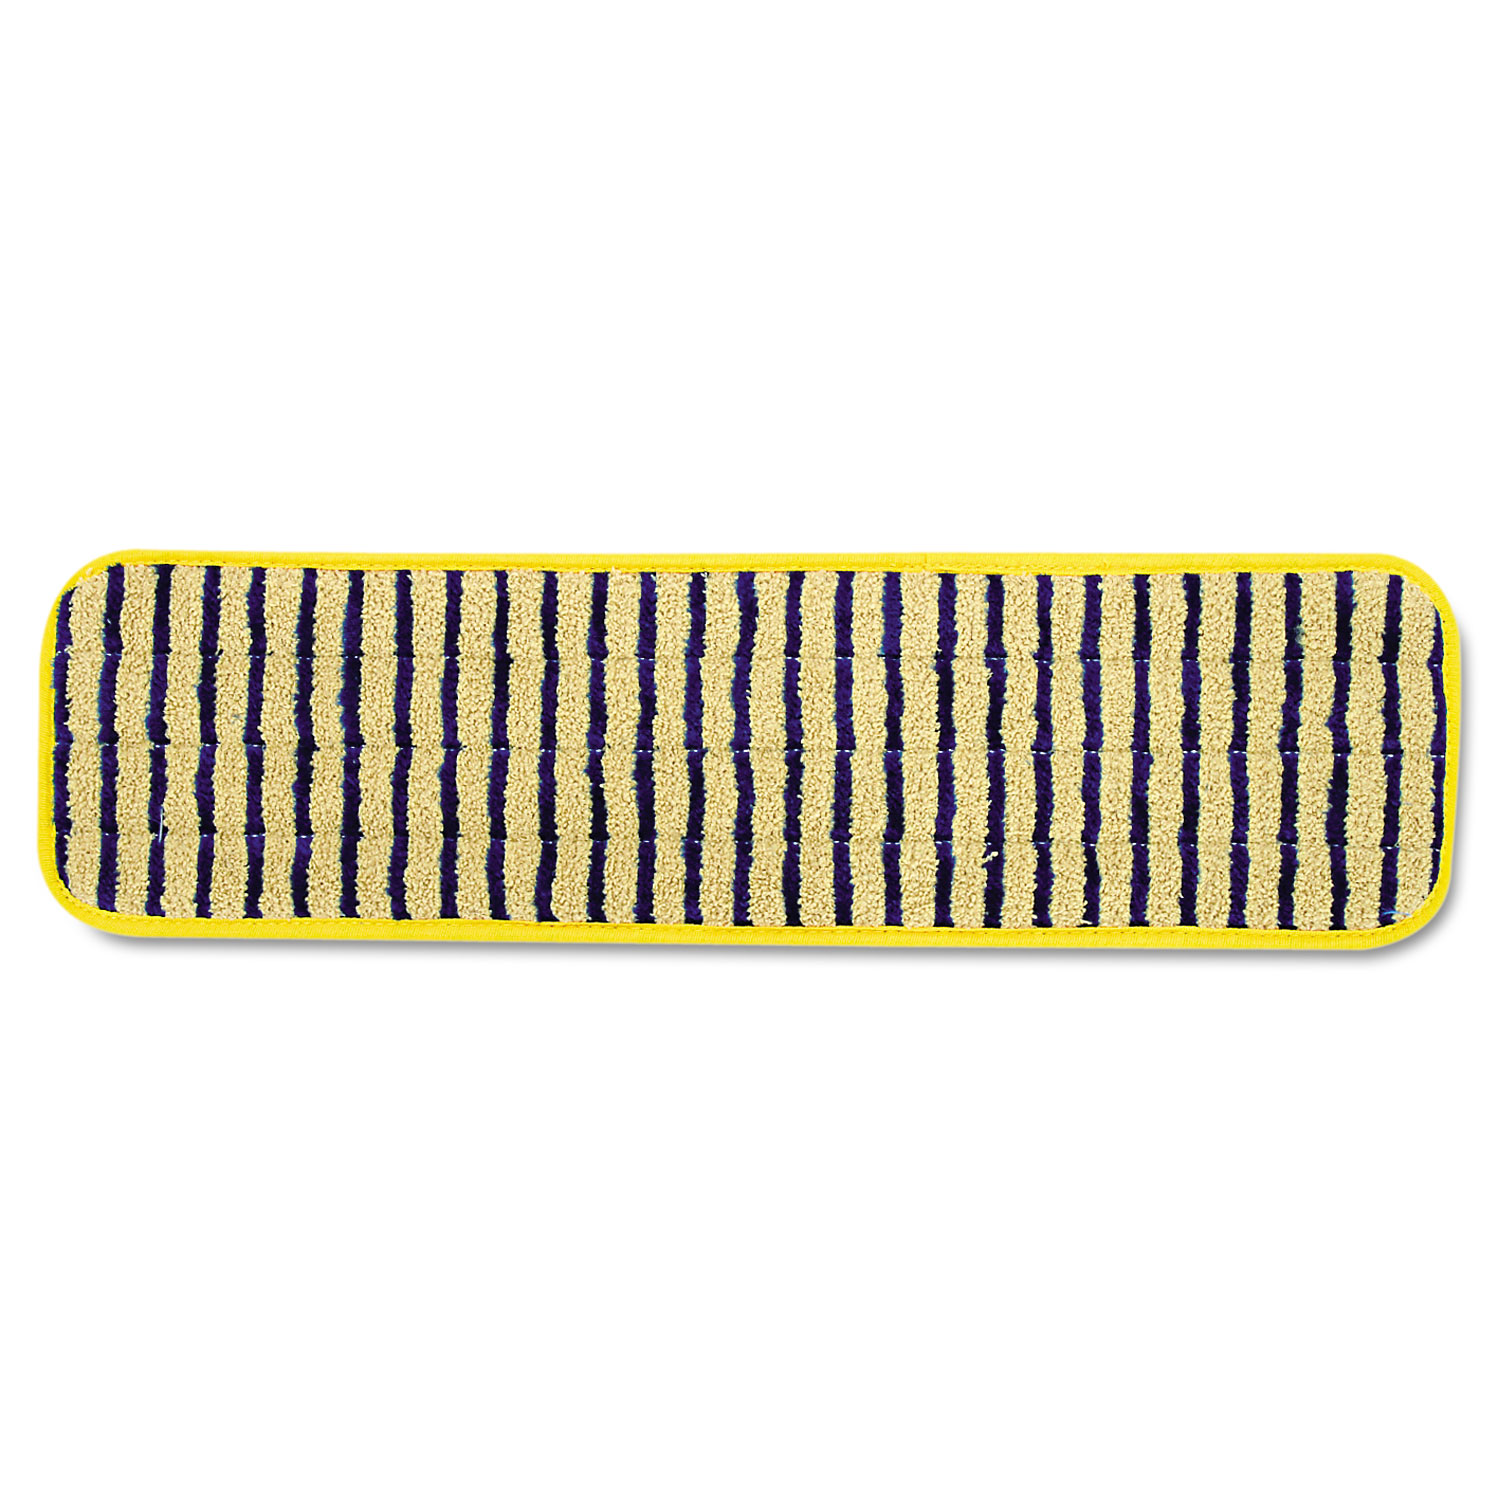 Details about   NEW 10 PCS GENUINE OSBORN POLYPRO STRIP BRUSH REPLACEMENTS 25" X 1.5" 0.028" PP 